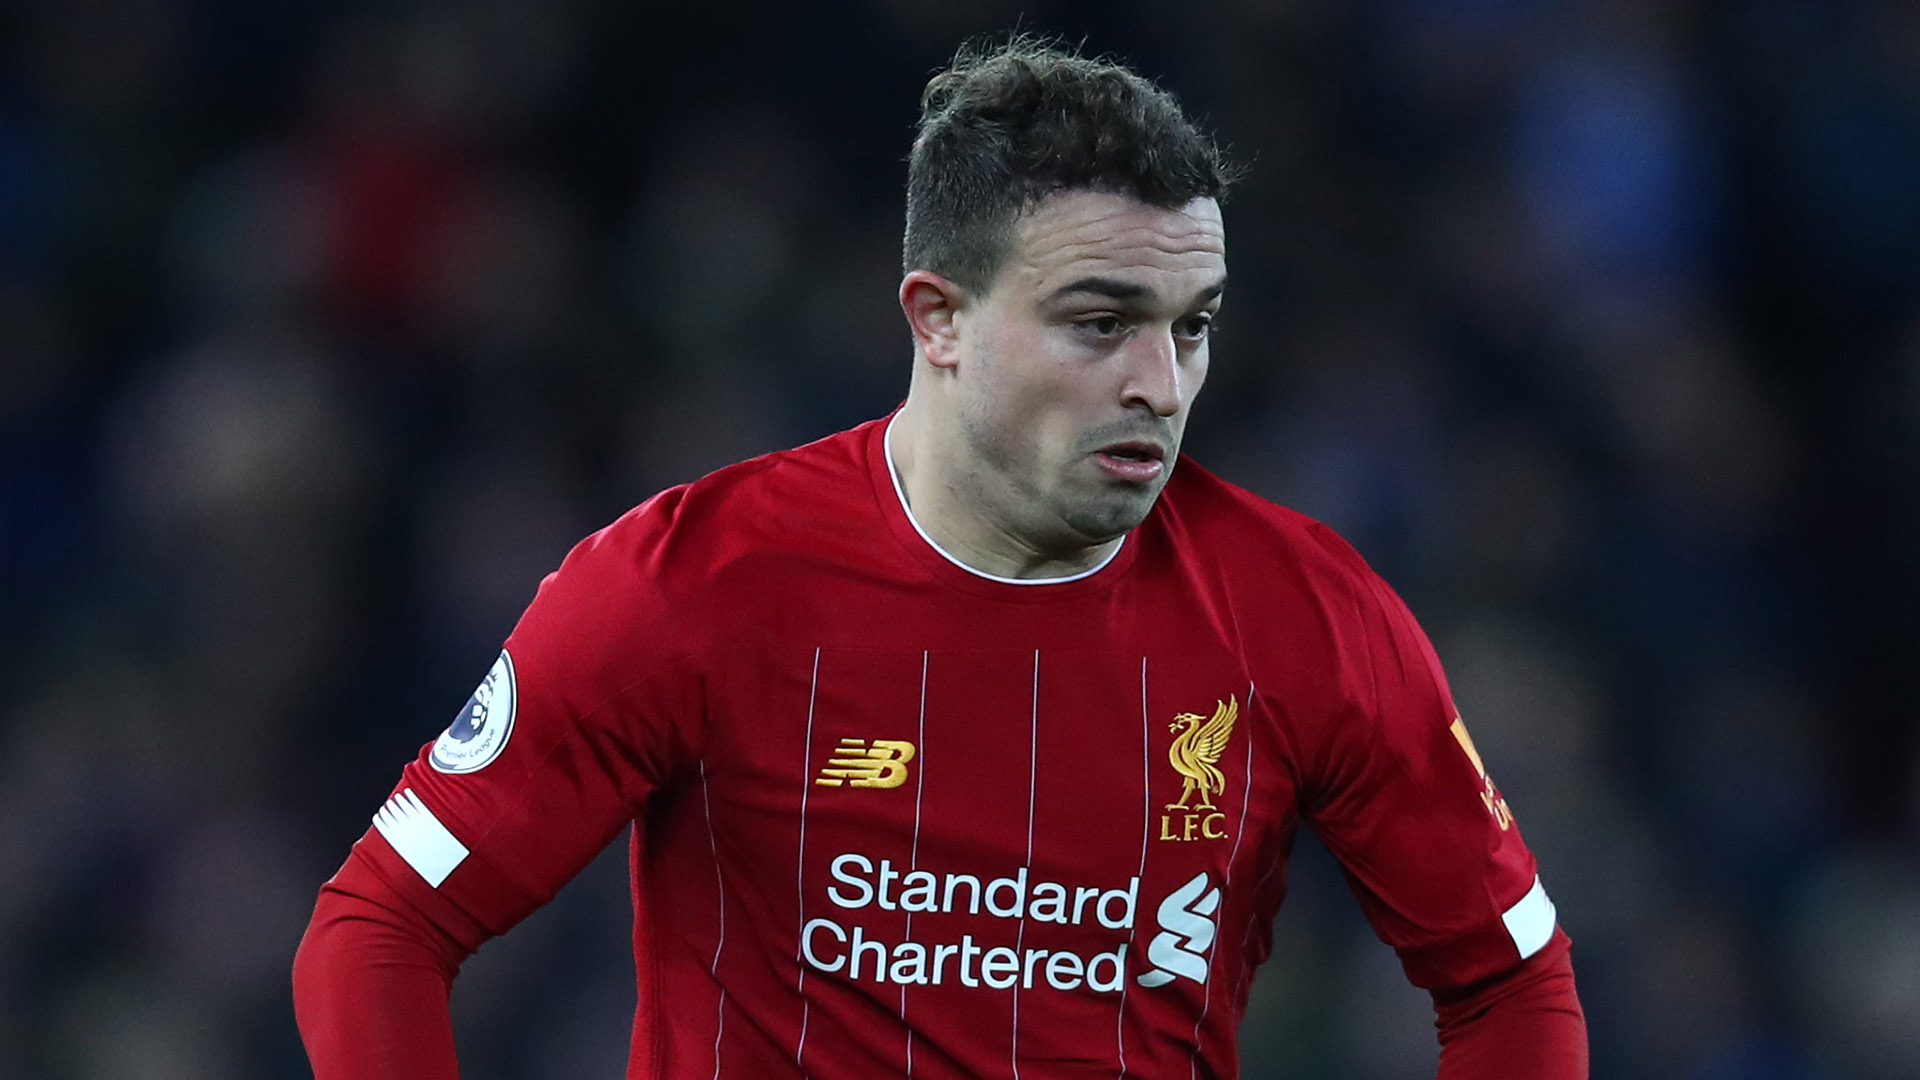 Liverpool should expect 'many offers' for Shaqiri when transfer window reopens, says his agent